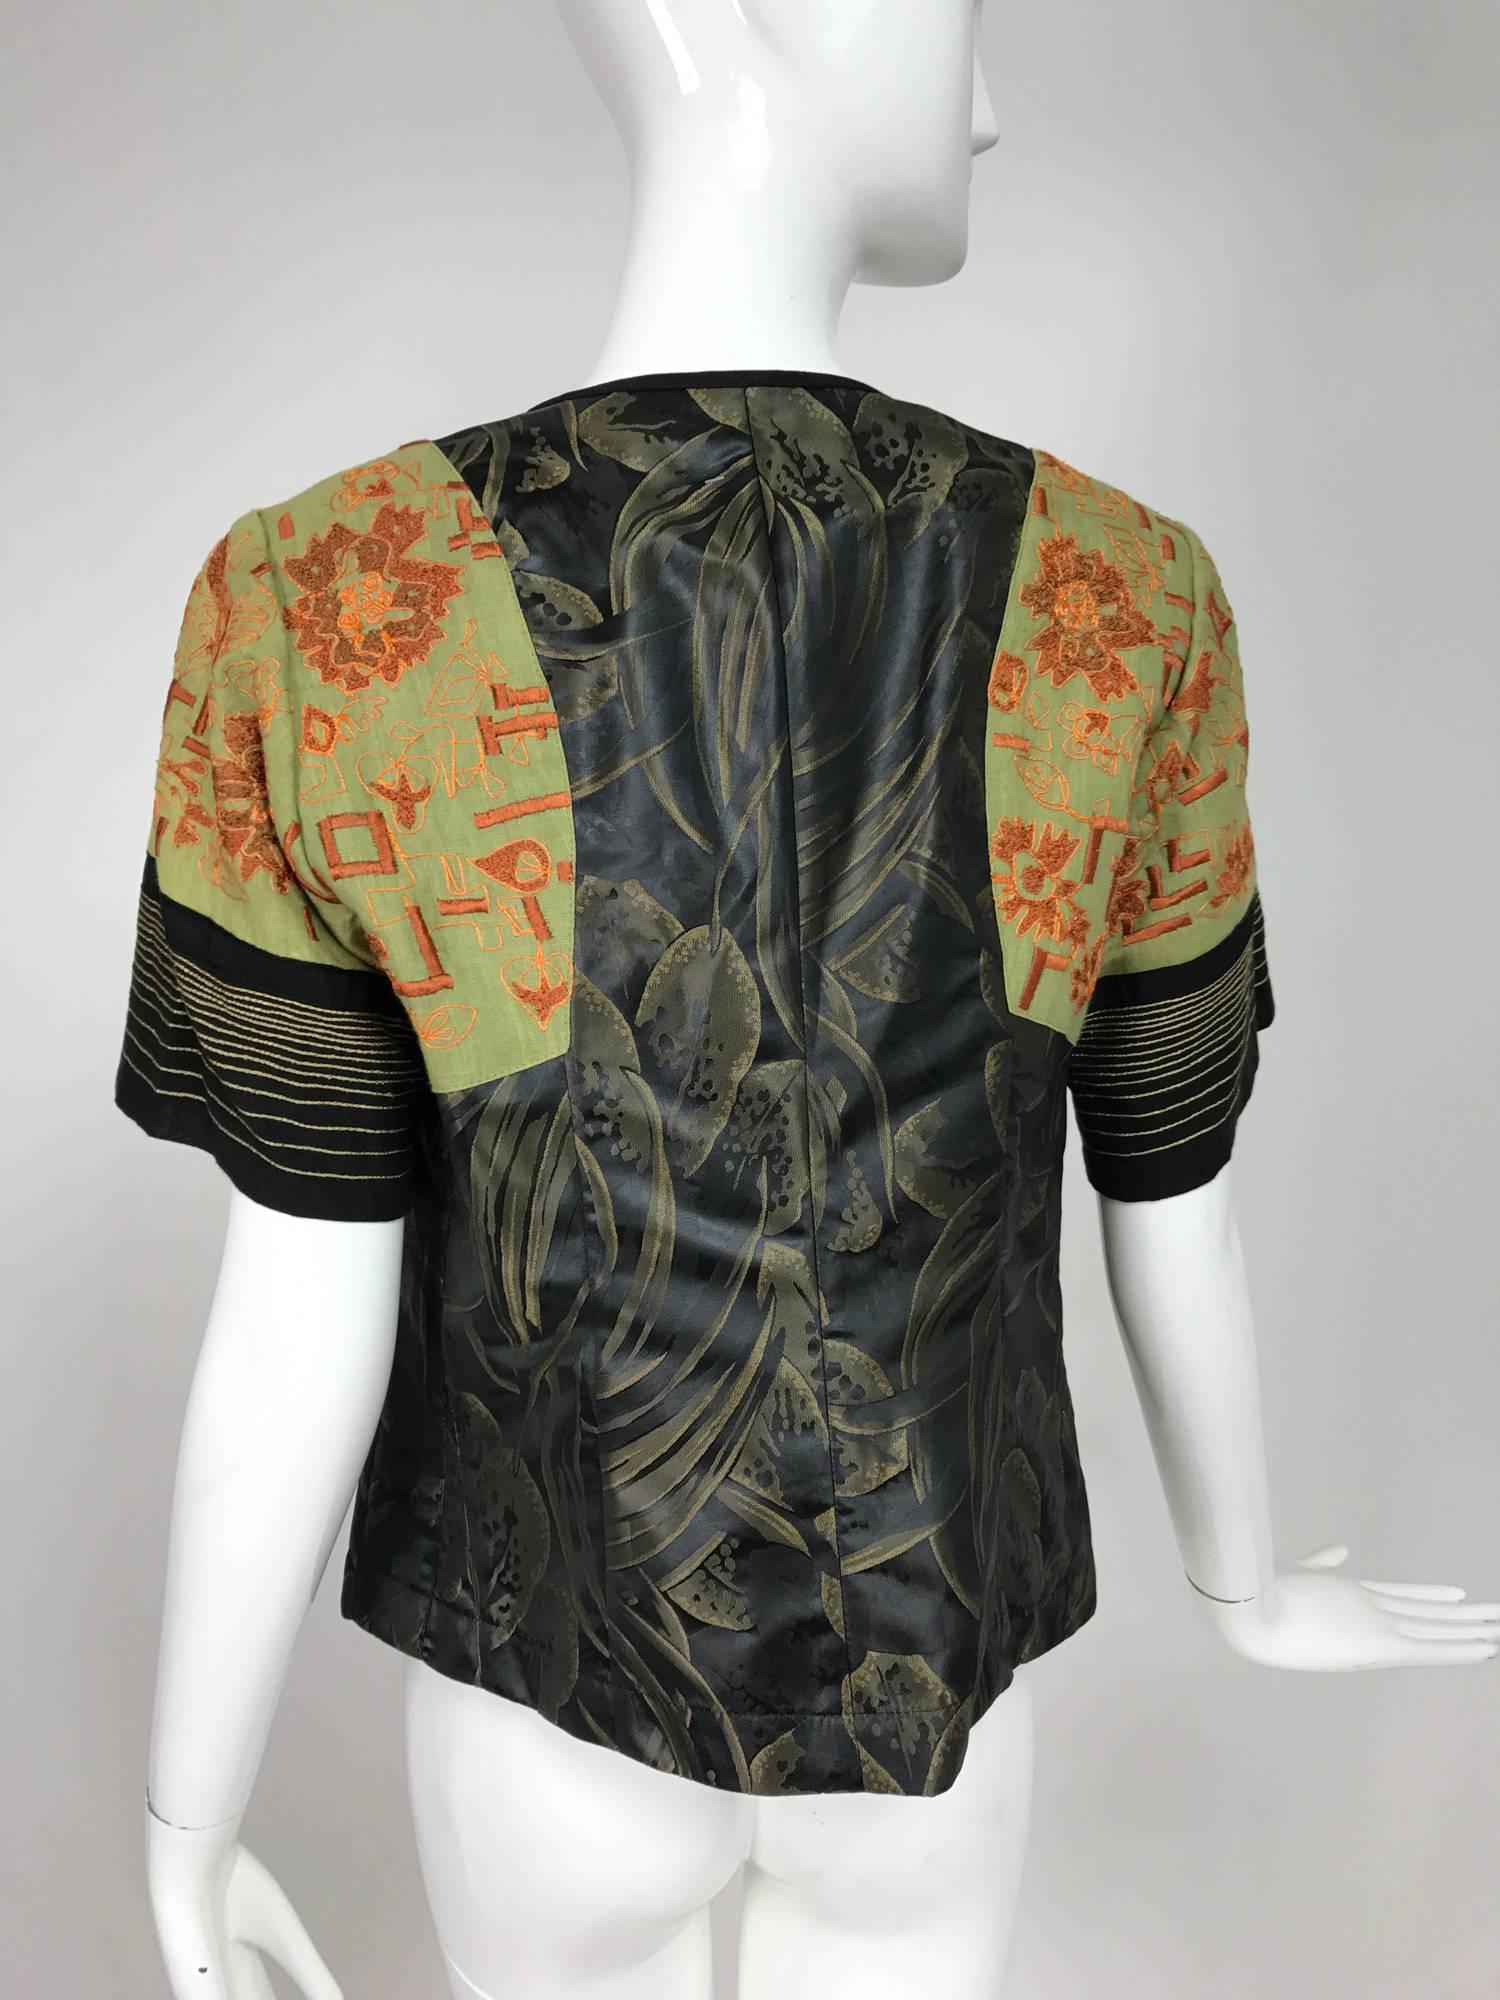 Dries Van Noten mixed fabric embroidered short sleeve jacket 40...Button front jacket of silky jacquard fabric, the shoulders have set in pieces of coral embroidered green linen, the sleeve ends are horizontally embroidered stripes...Jacket closes